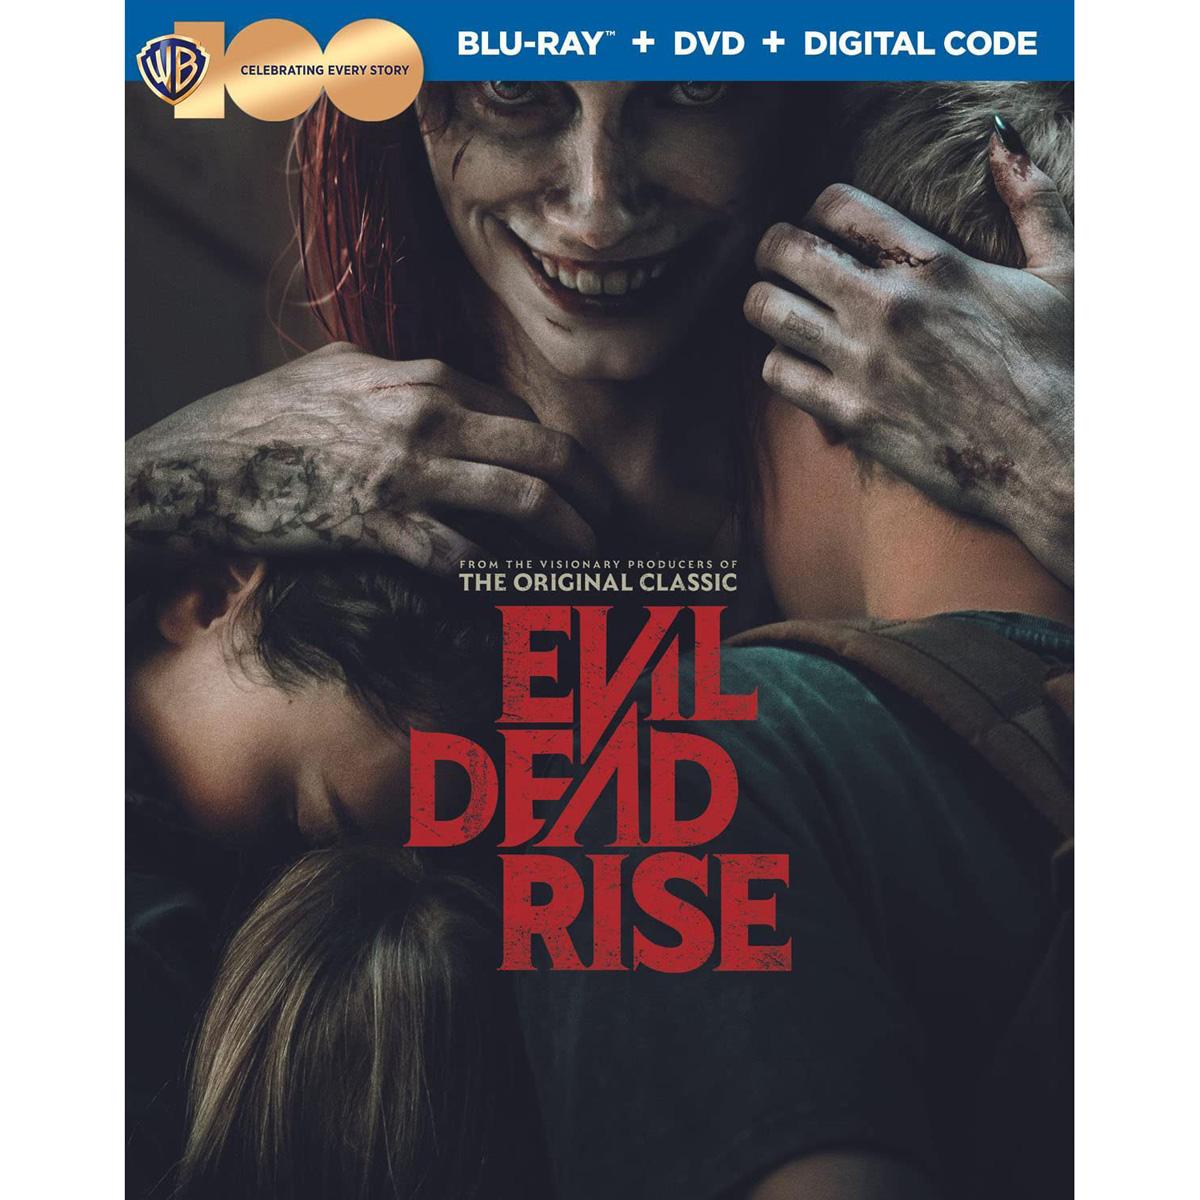 Evil Dead Rise Blu-ray for $5